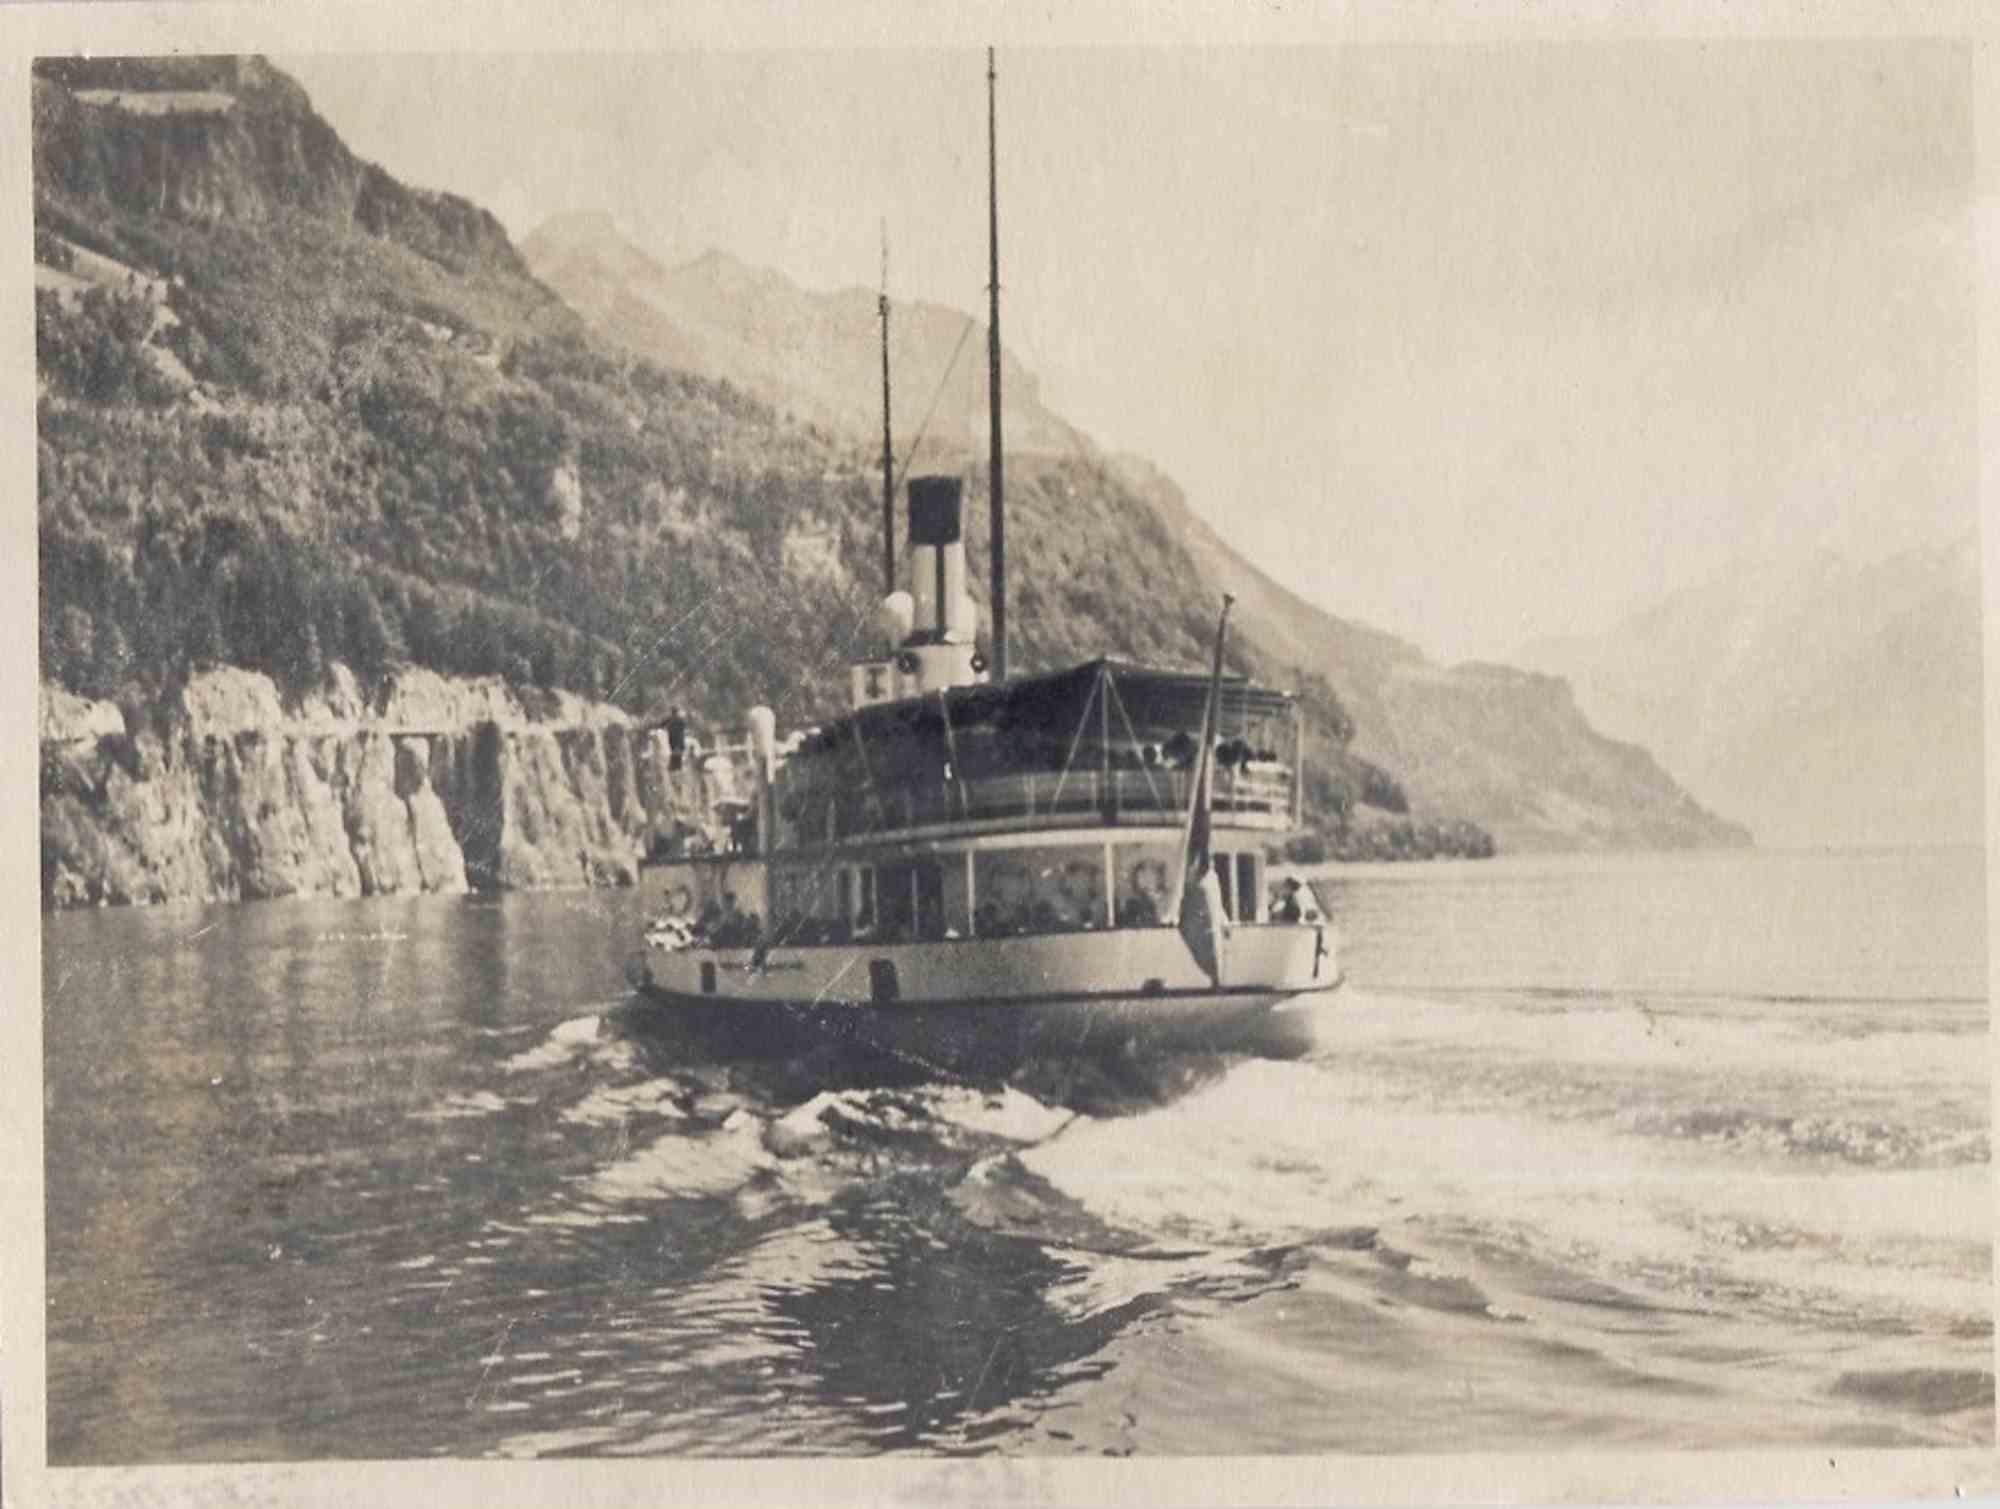 Old Days Photo - The Boat - Vintage Photo - Mid-20th Century